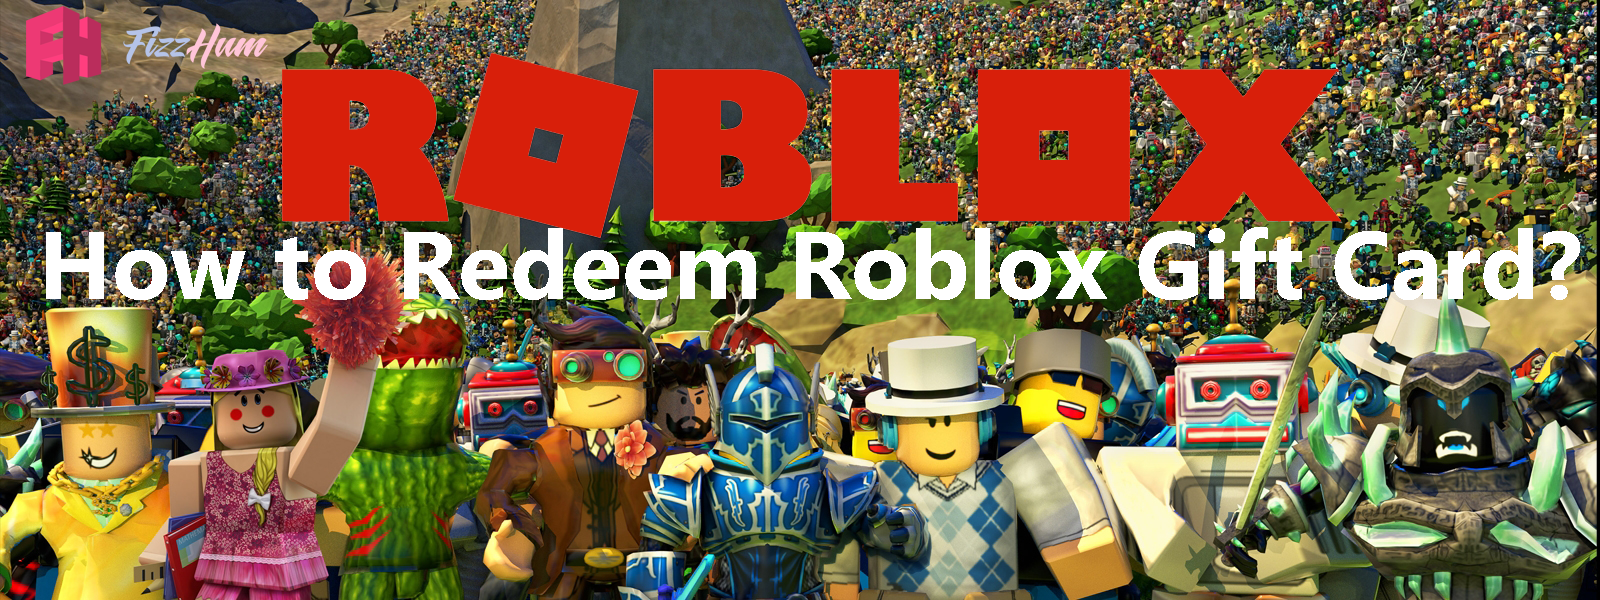 How To Redeem Roblox Gift Card Step By Step 2021 Fizzhum Com - roblox gift card images